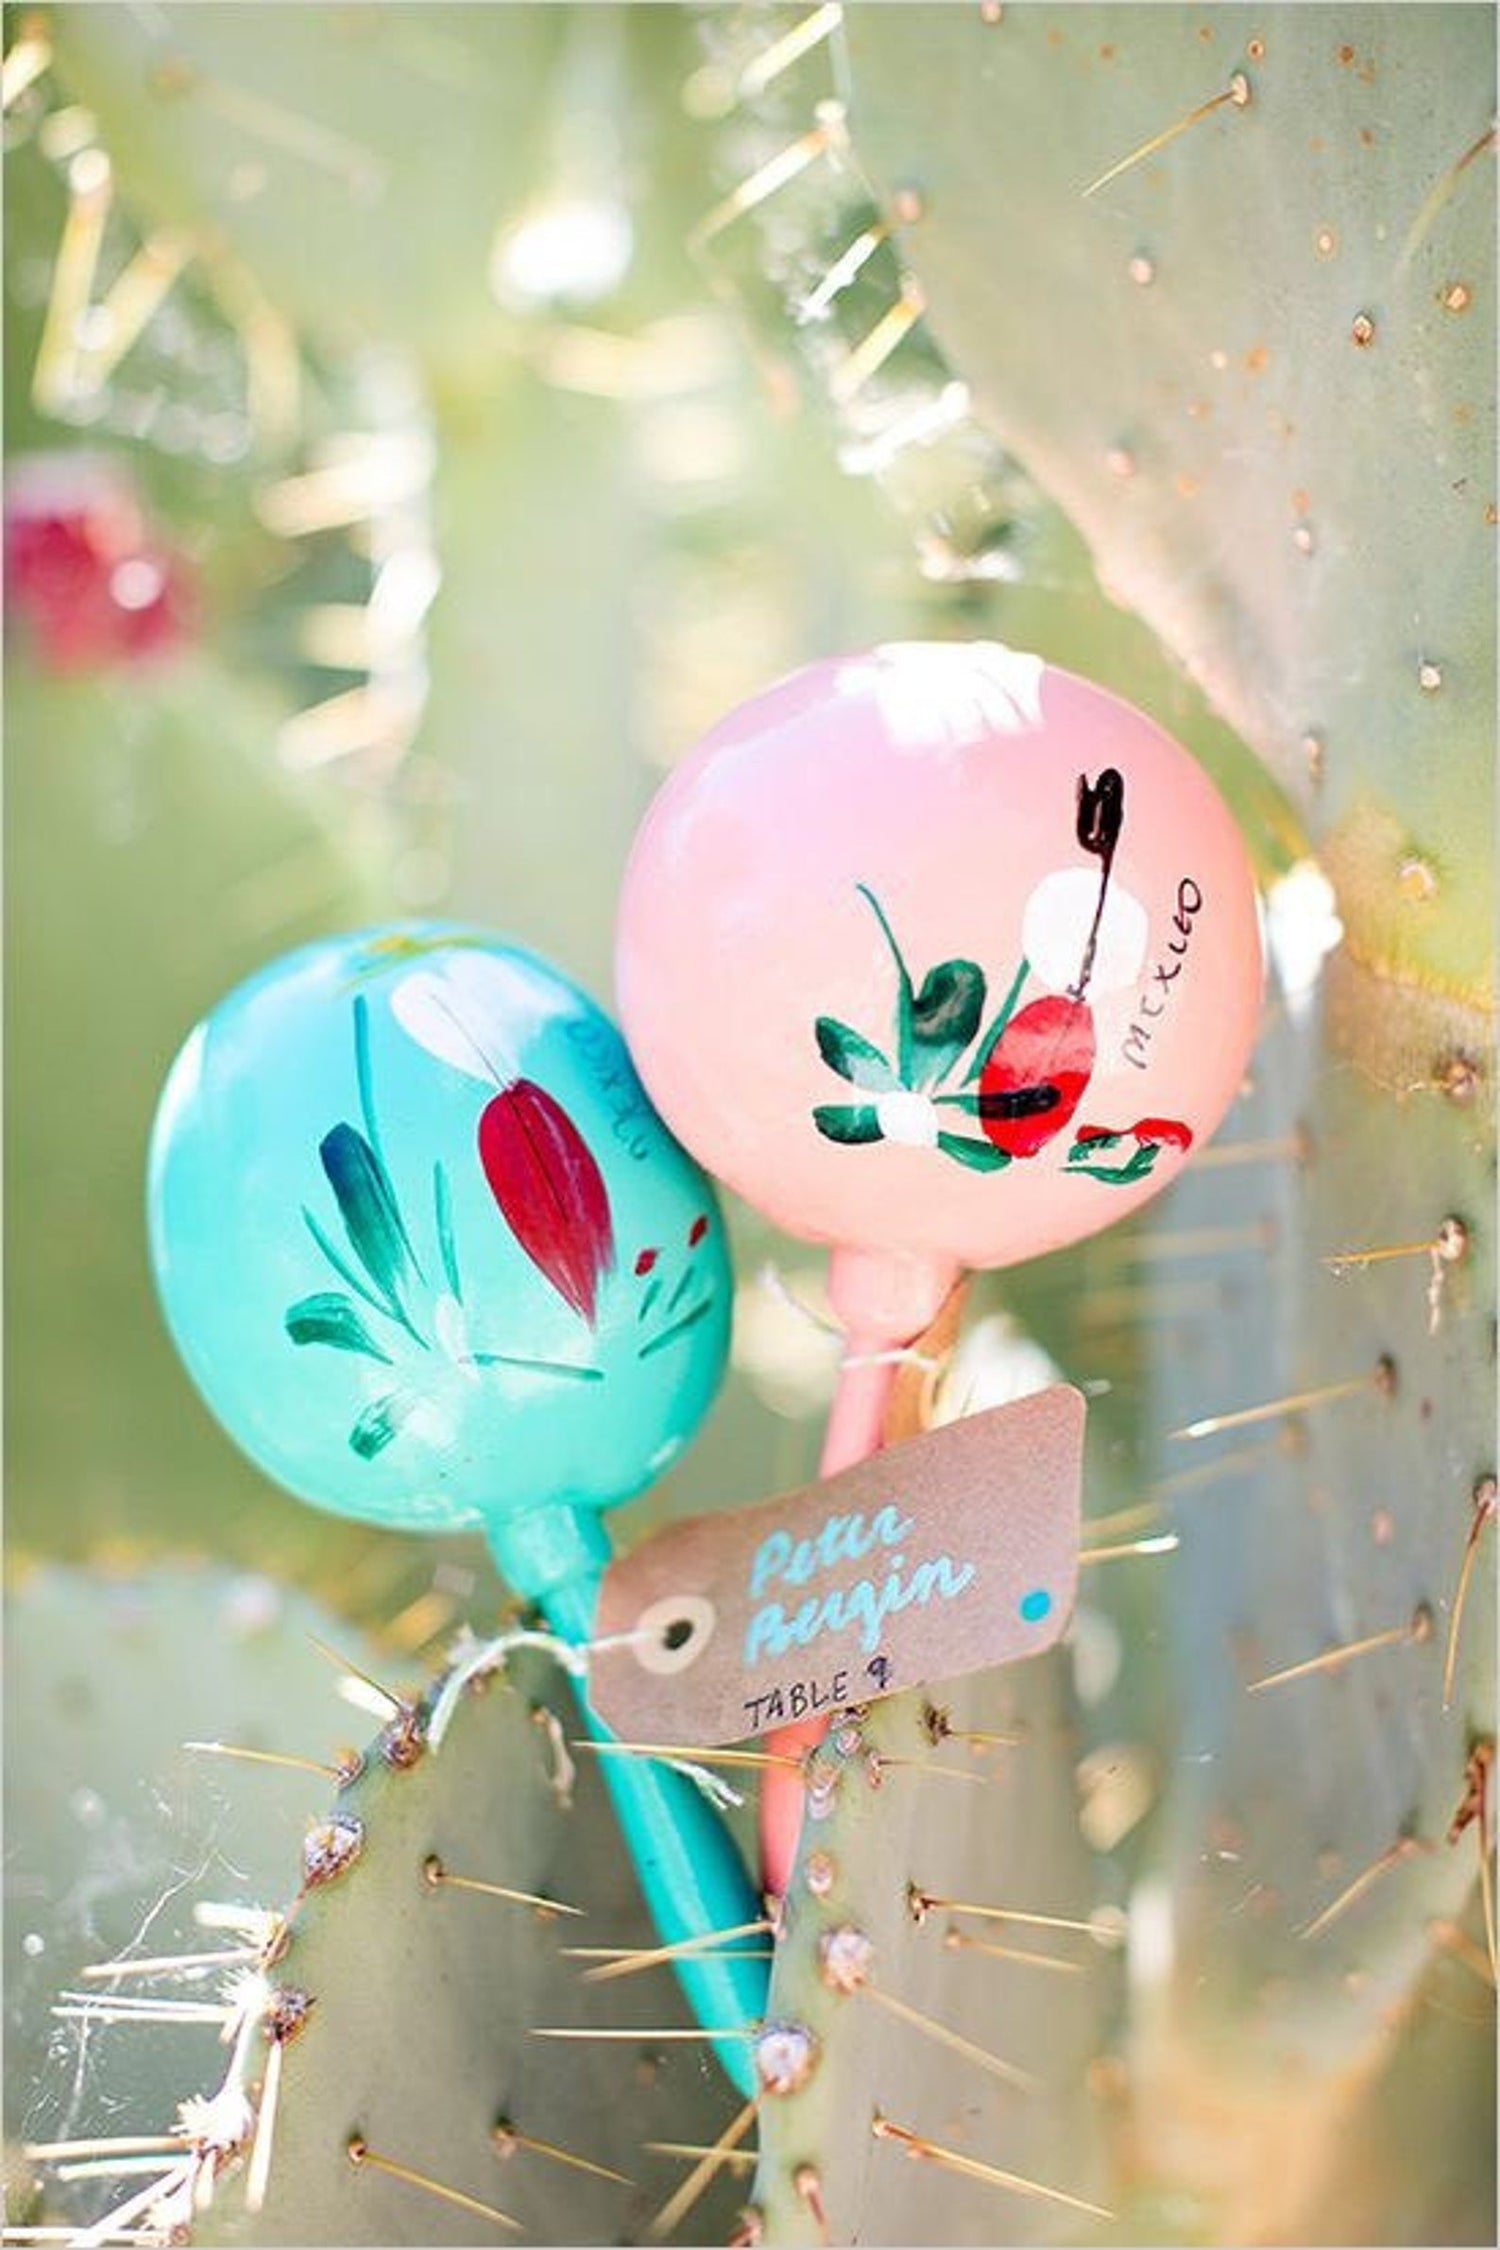 Maracas - Personalized Party Favors for your Fiesta